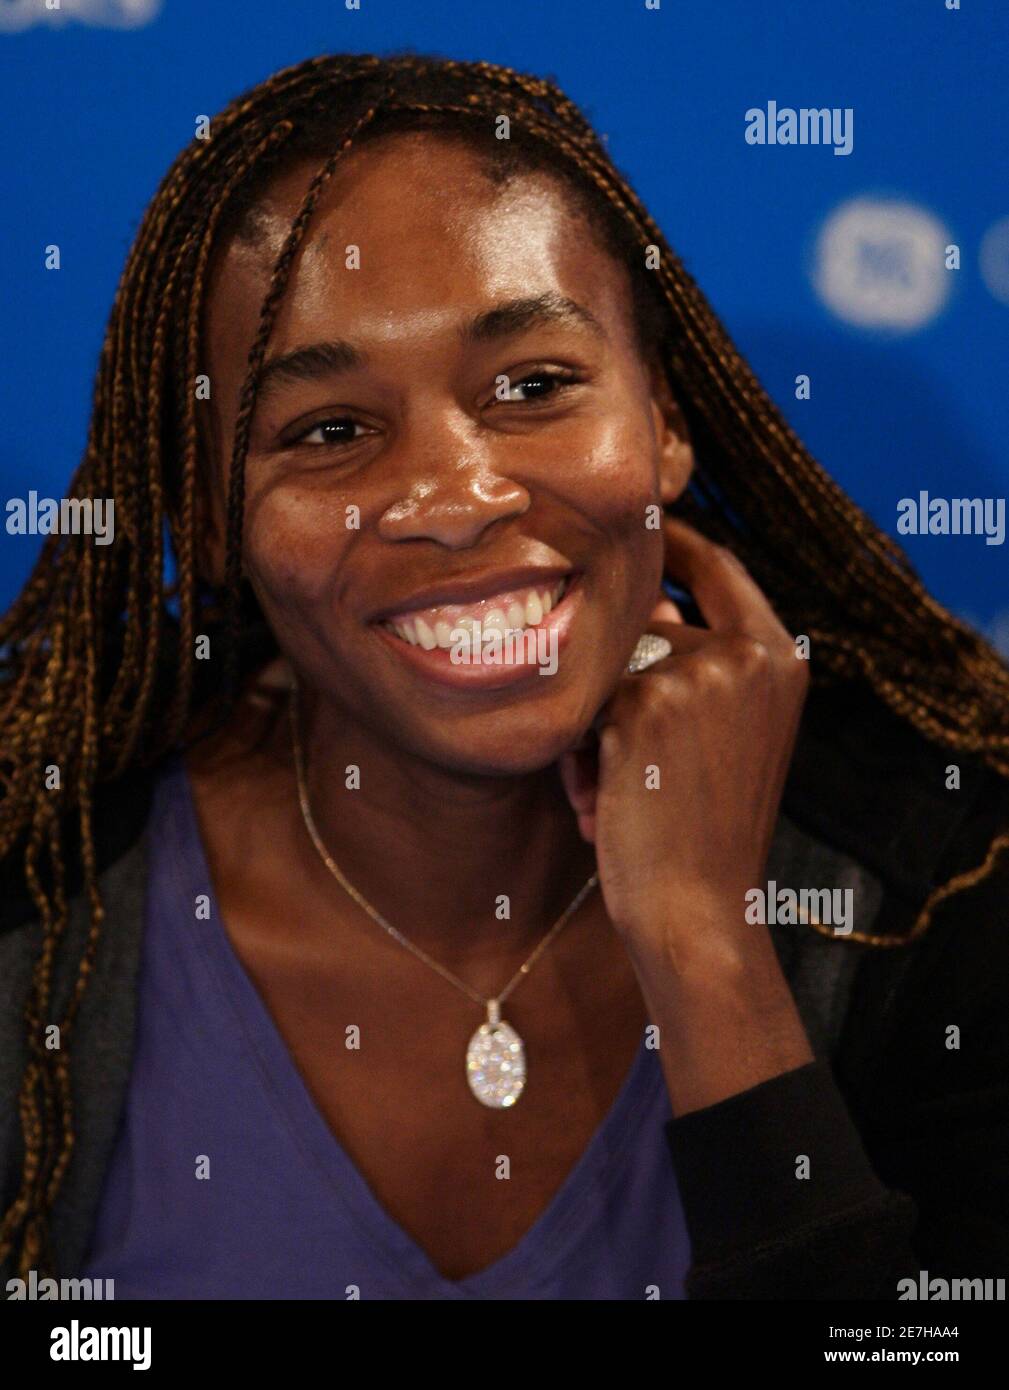 Venus Wlliams of the US smiles as she listens to questions at a news conference in Melbourne January 17, 2009 prior to the start of the Australian Open tennis tournament.     REUTERS/Russell Boyce   (AUSTRALIA) Stock Photo